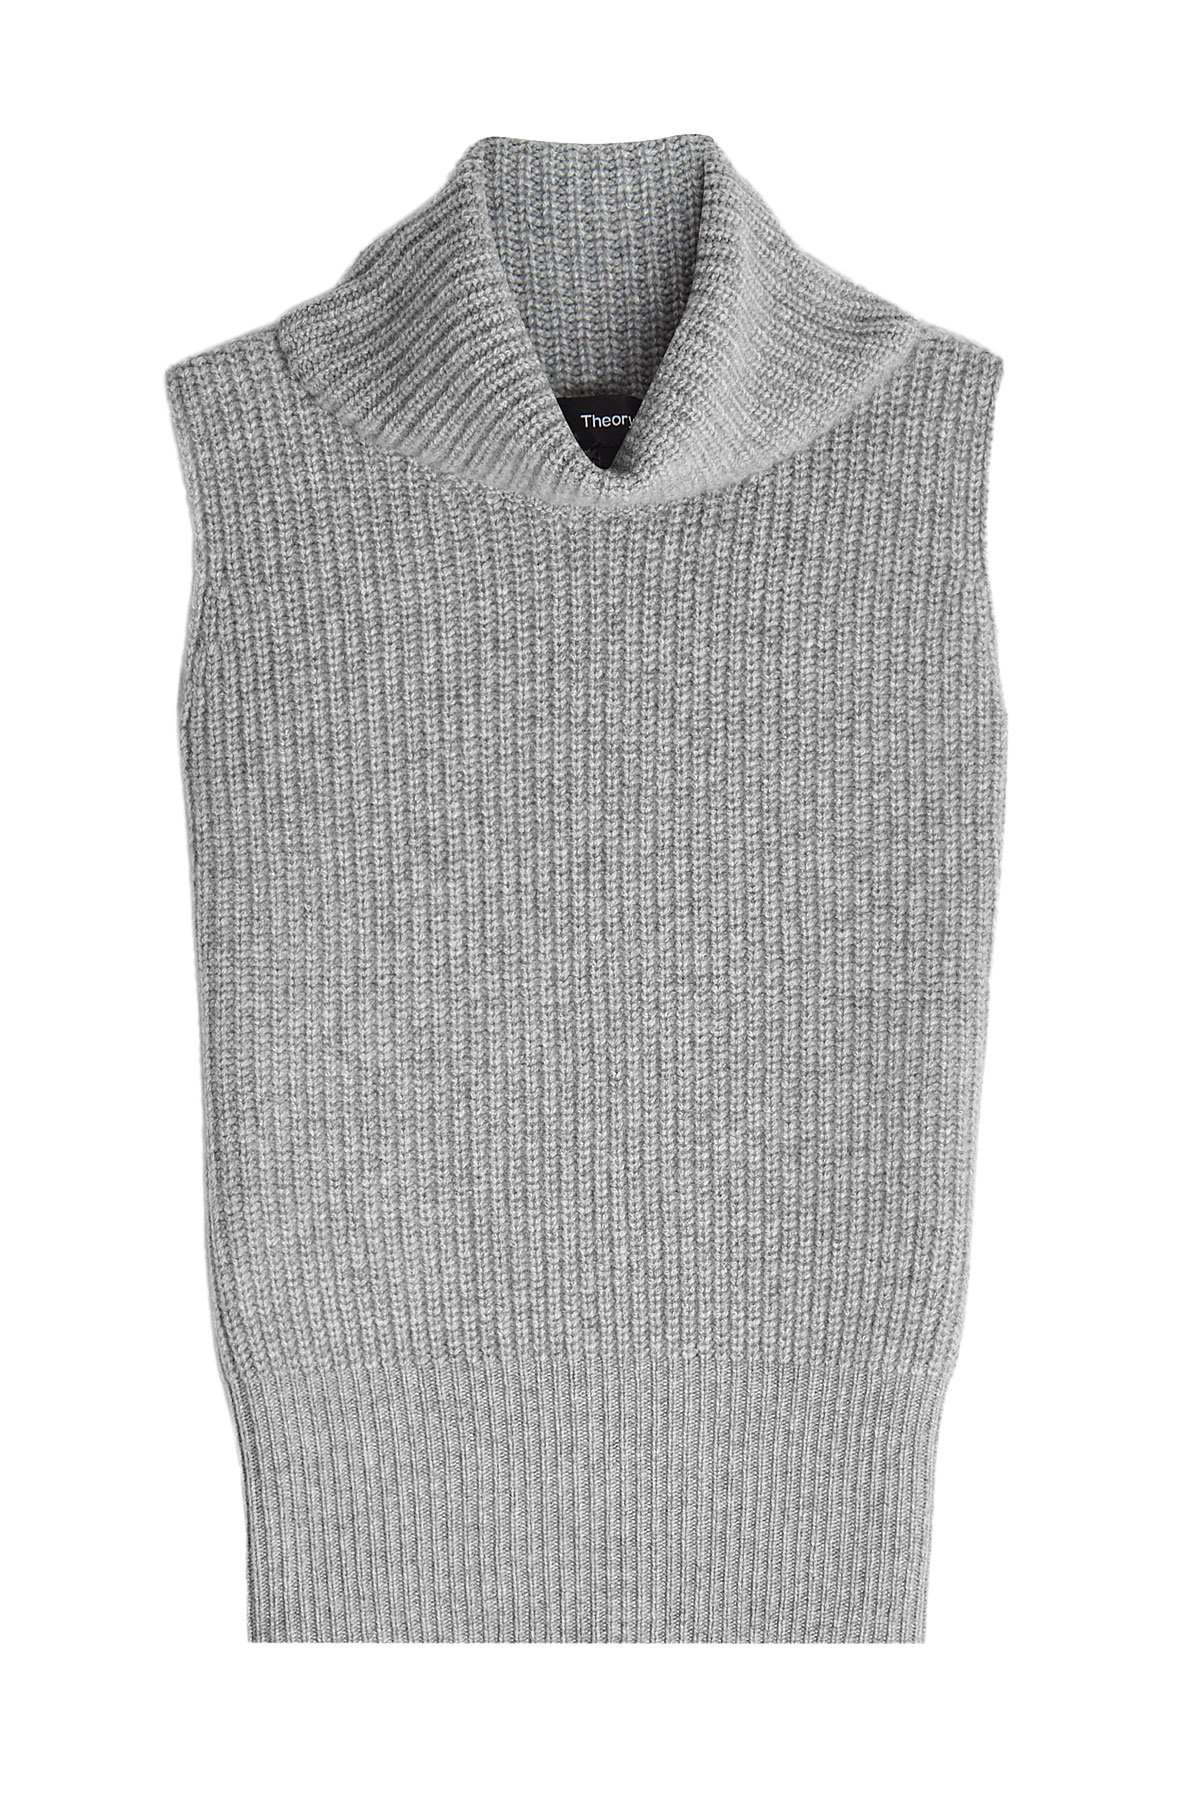 Theory - Sleeveless Cashmere Pullover with Turtleneck